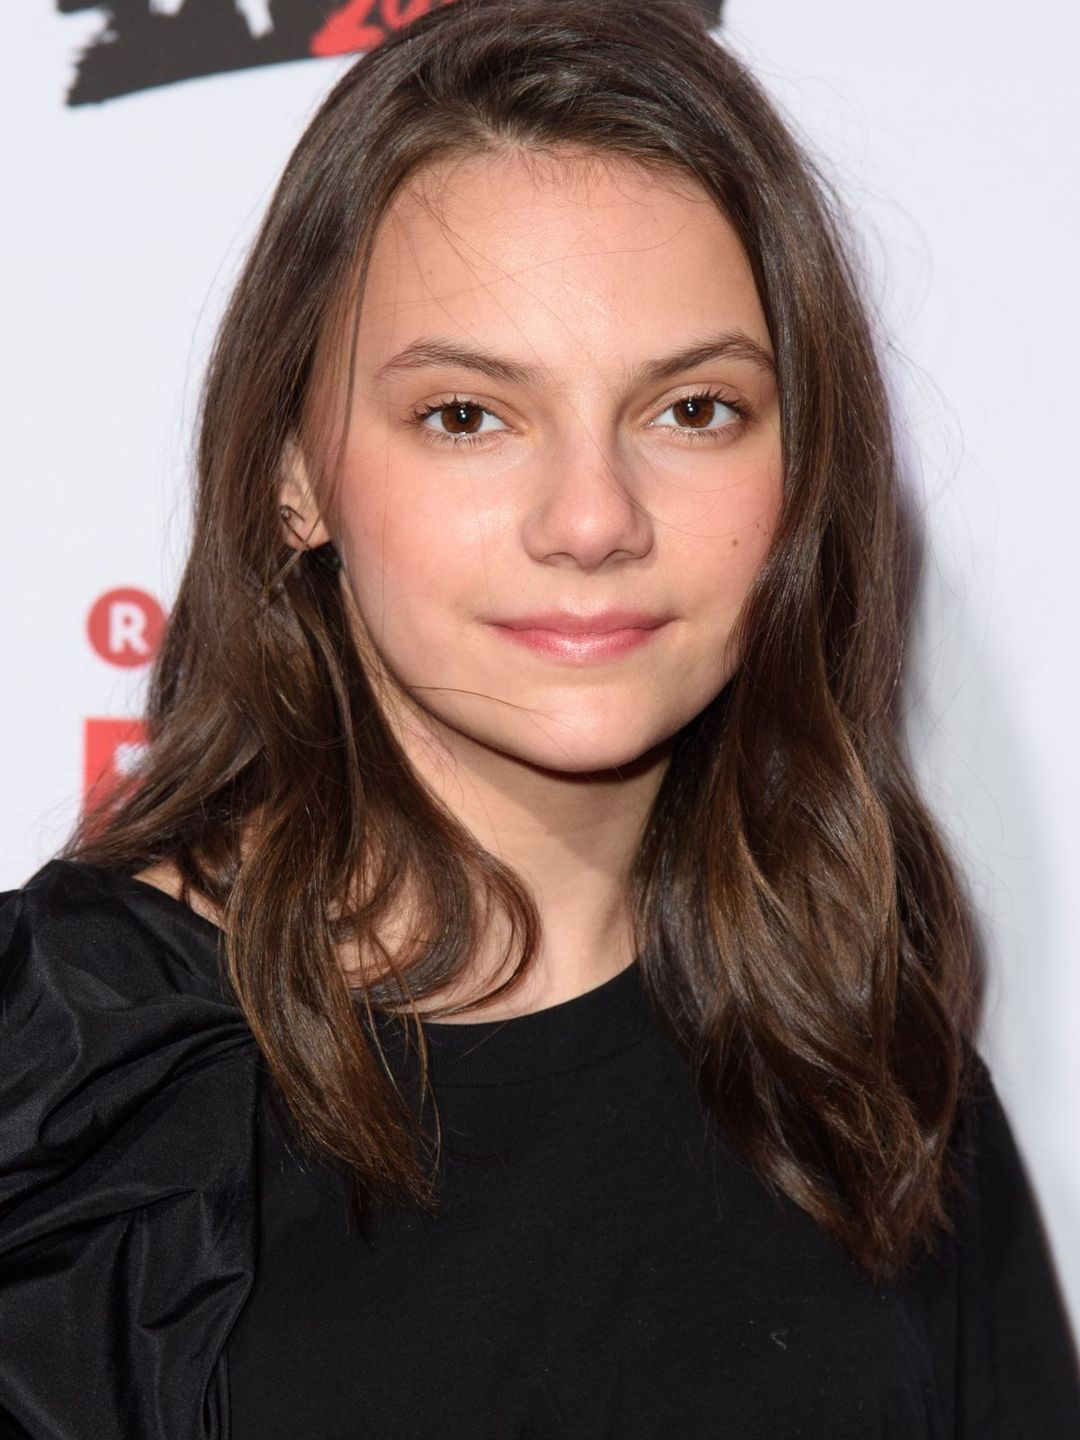 Dafne Keen who are her parents